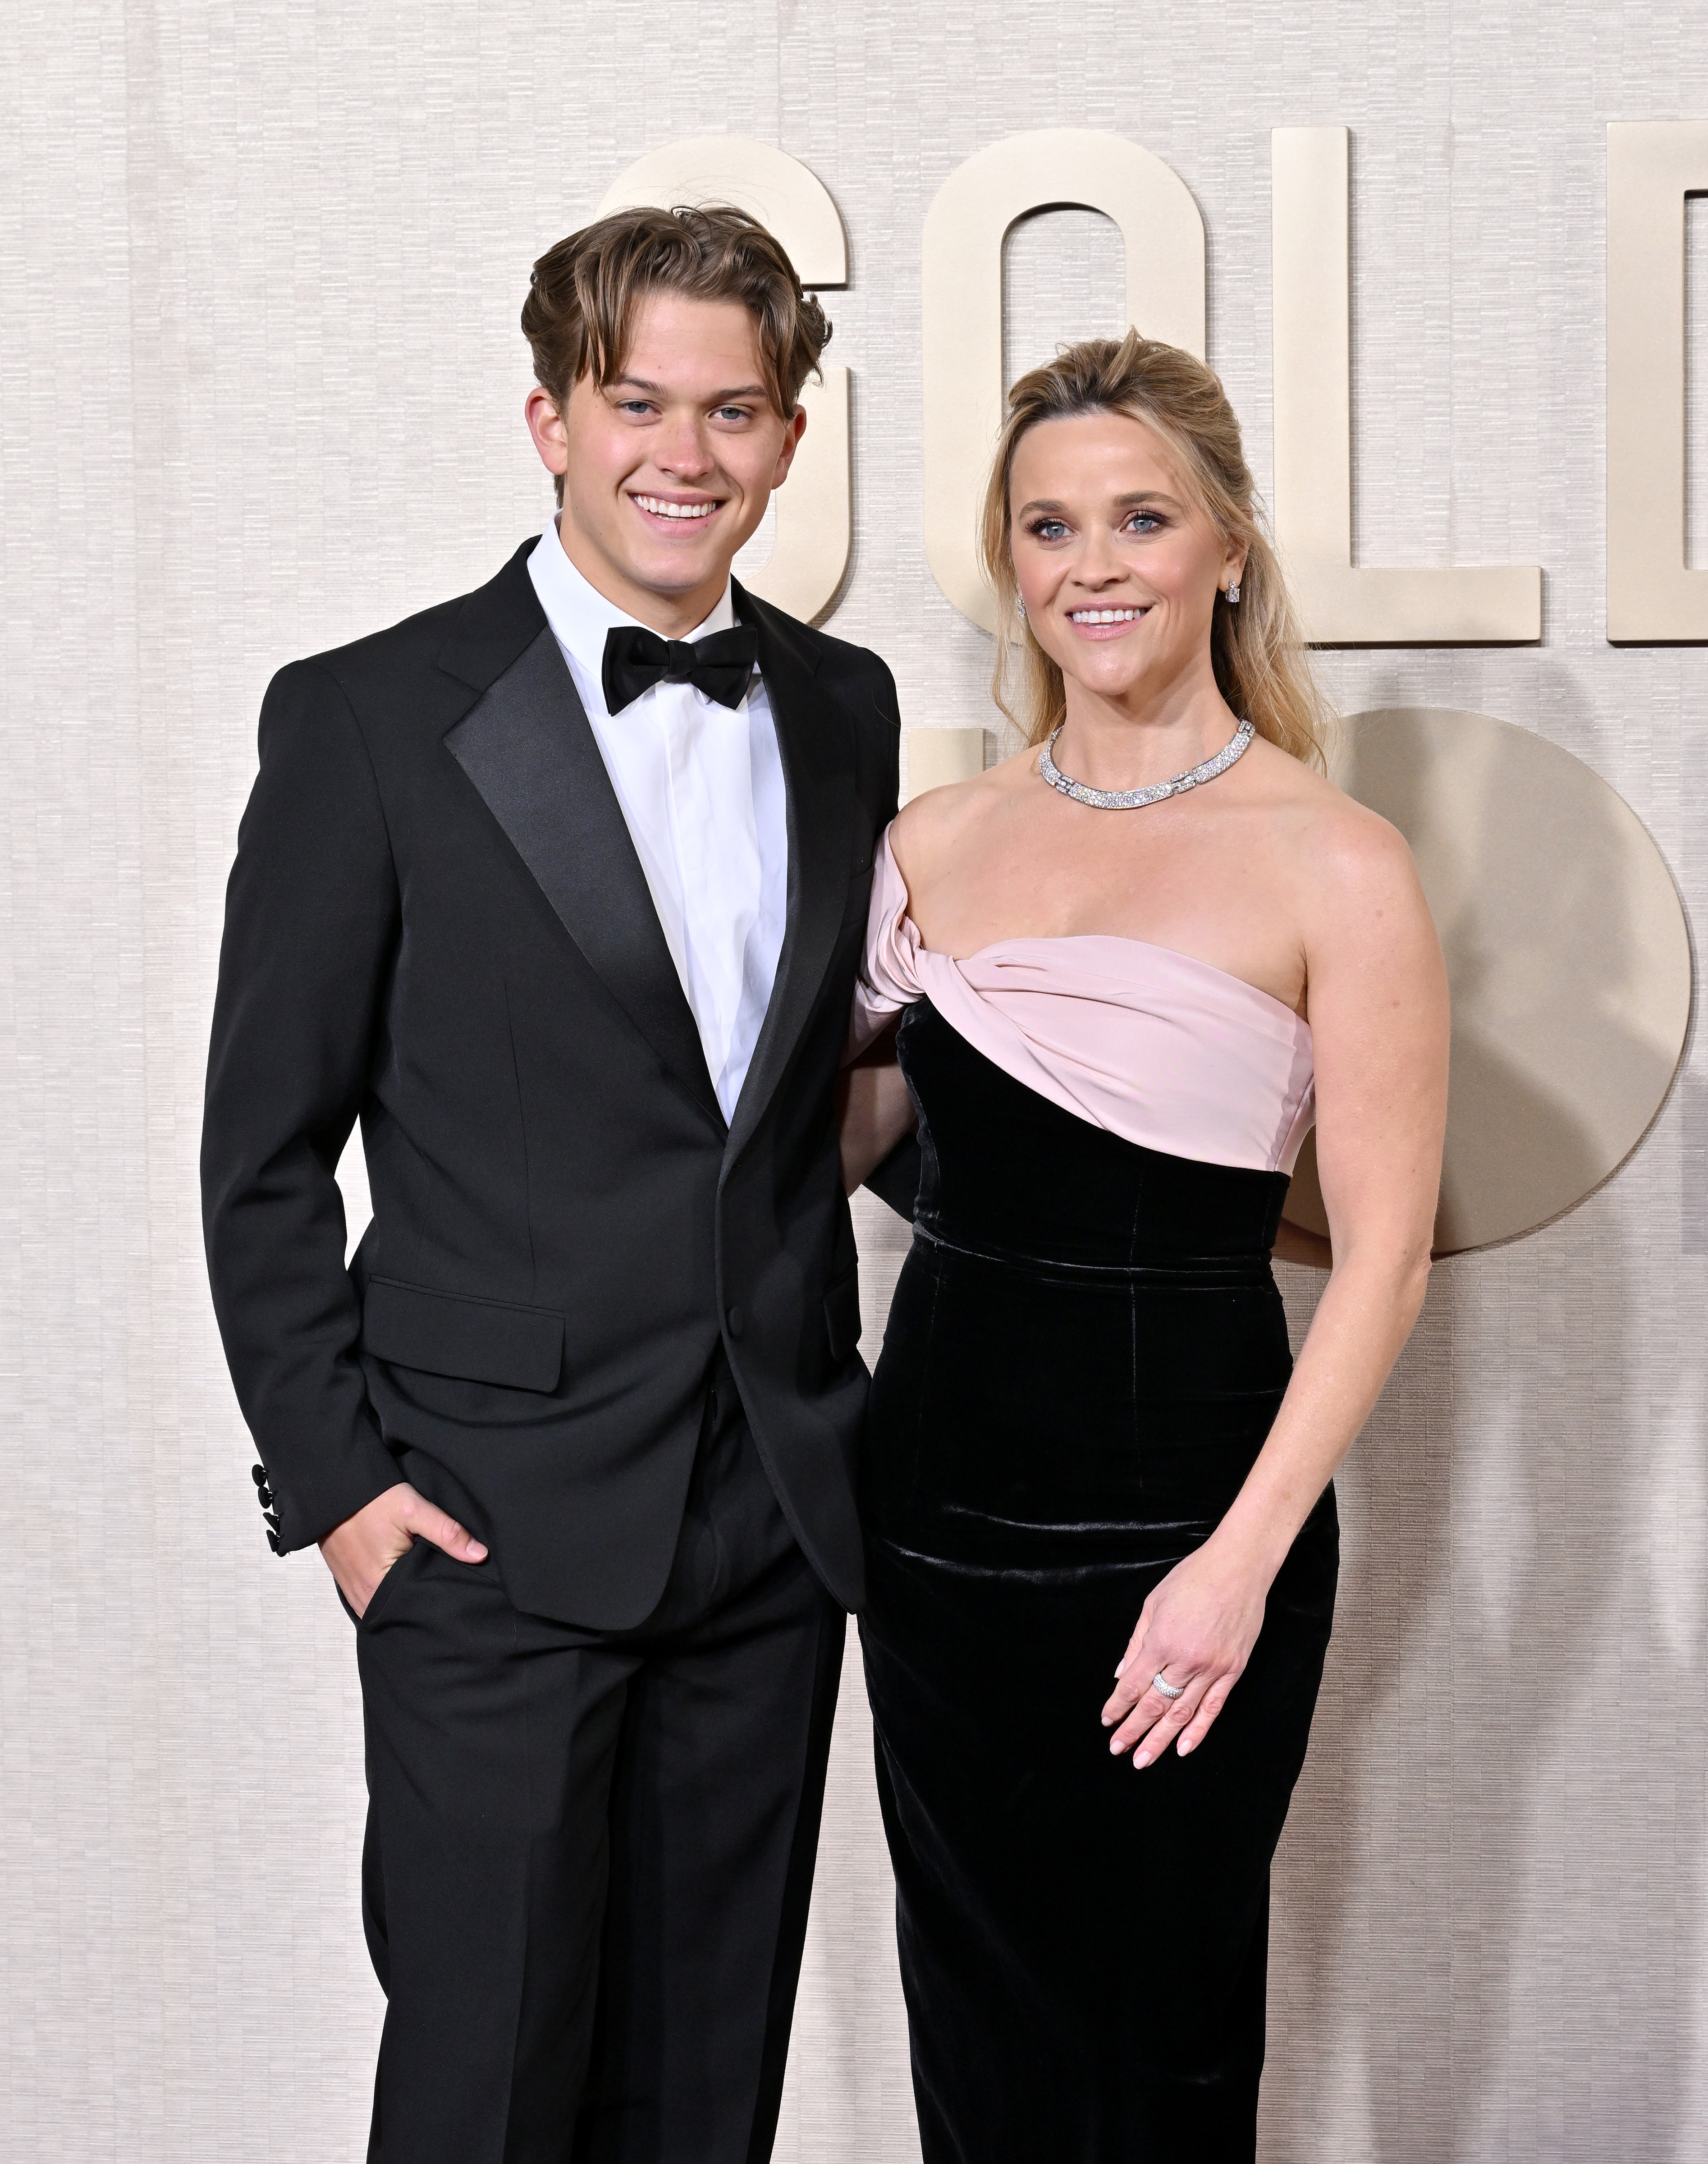 Deacon in a black tuxedo and Reese in a strapless gown, both smiling, at a media event